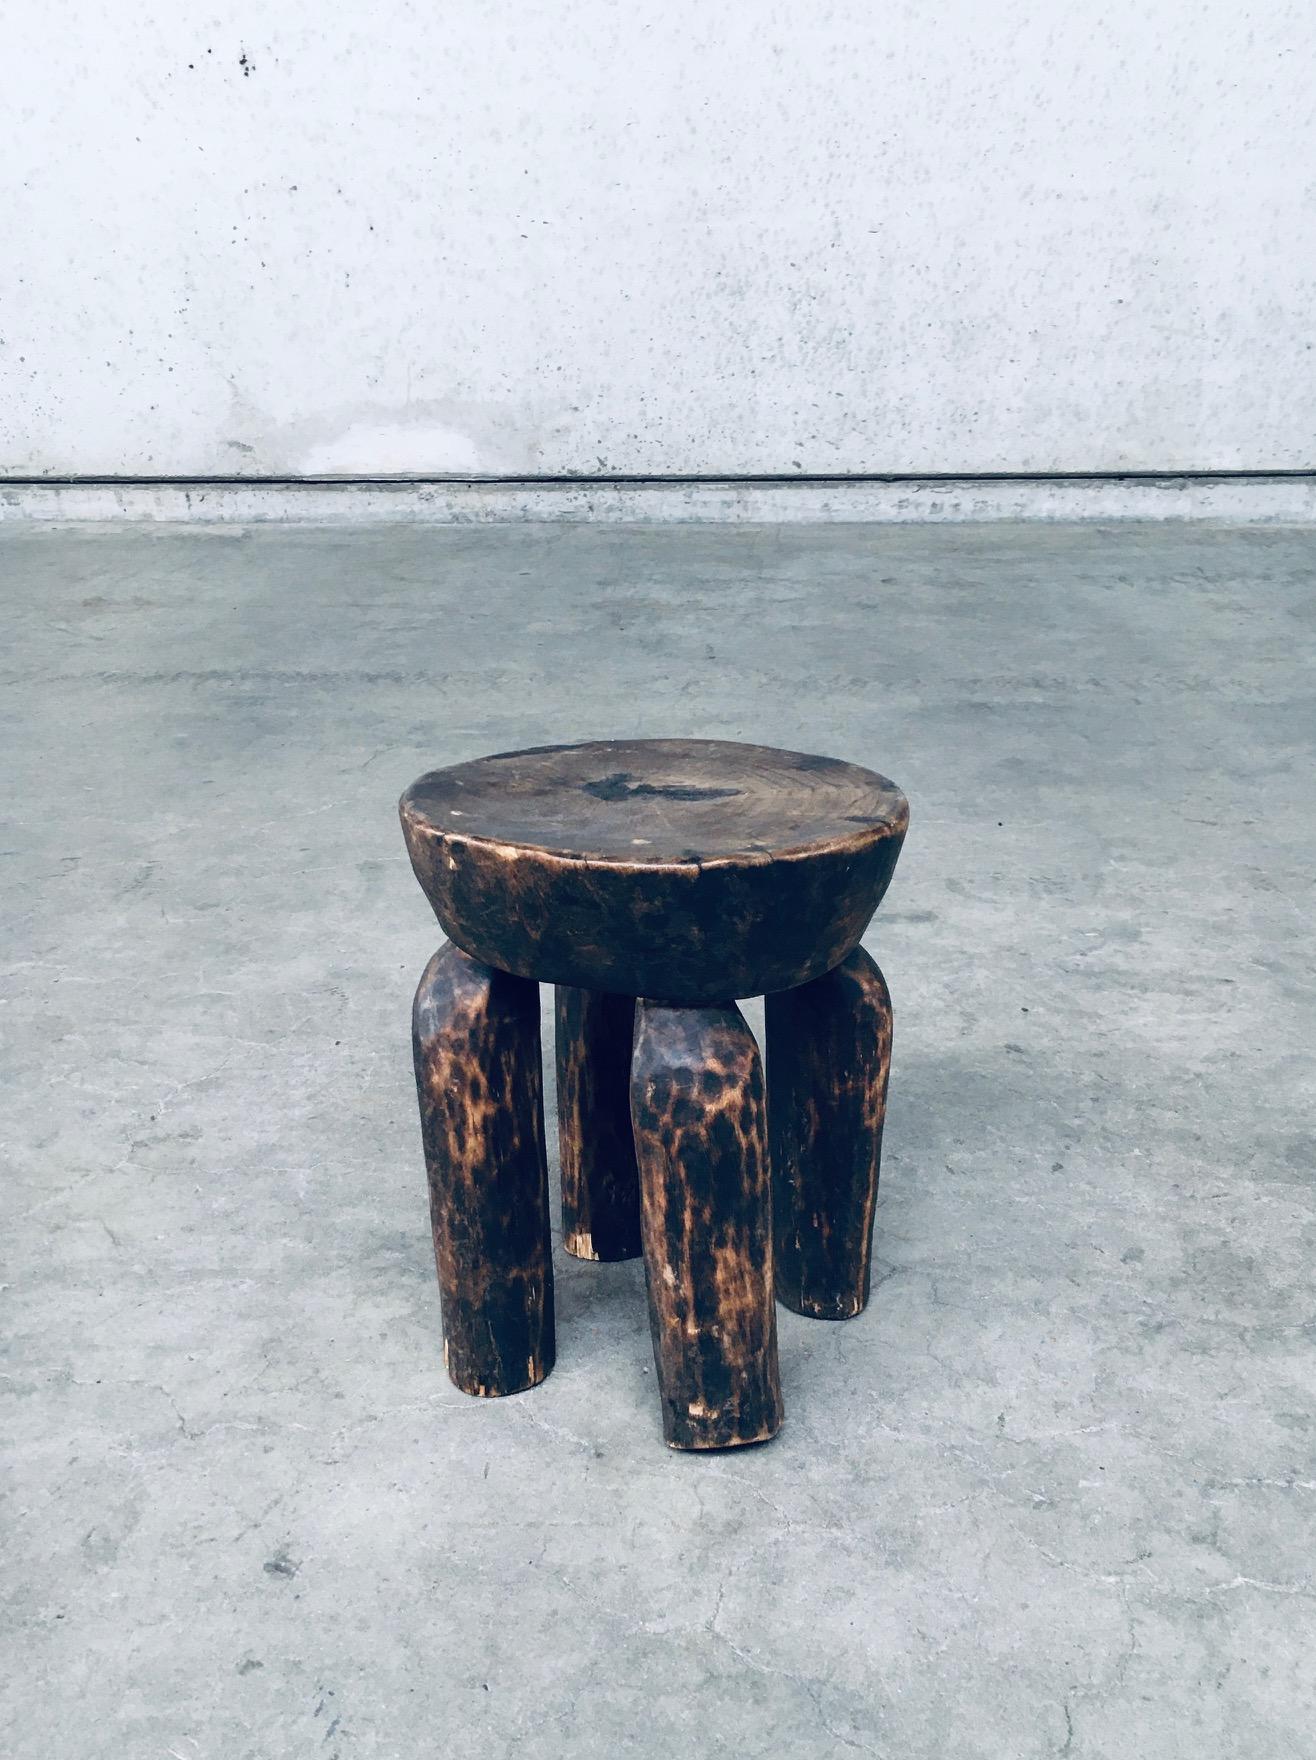 Vintage Folk Art Dogon African Low Wooden Stool. Made in Mali, 1920's period. Made by the Dogon Tribe / craftsman. Solid palm or local wood hand carved stool with nice patina. This comes in good condition with some small damages, which are normal